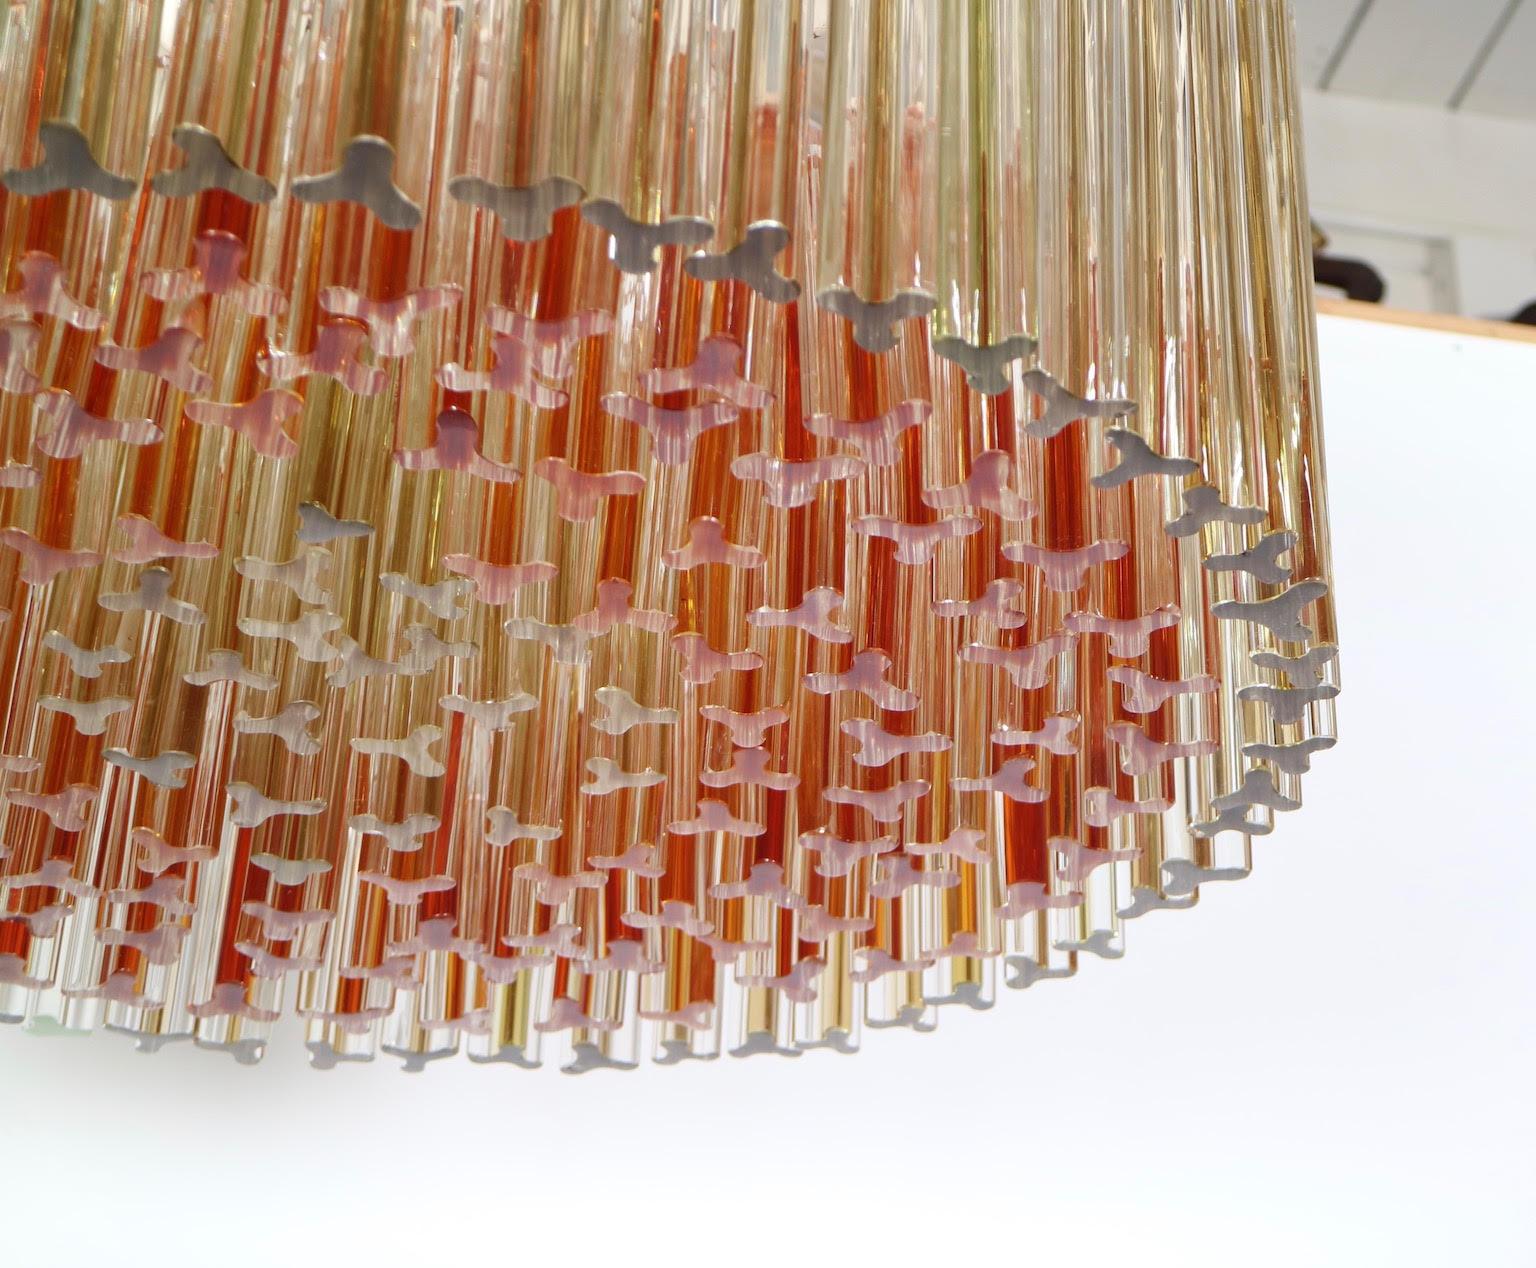 Mid-20th Century Hollywood Regency Venini Chandelier with Sommerso Trilobo Glass Rods